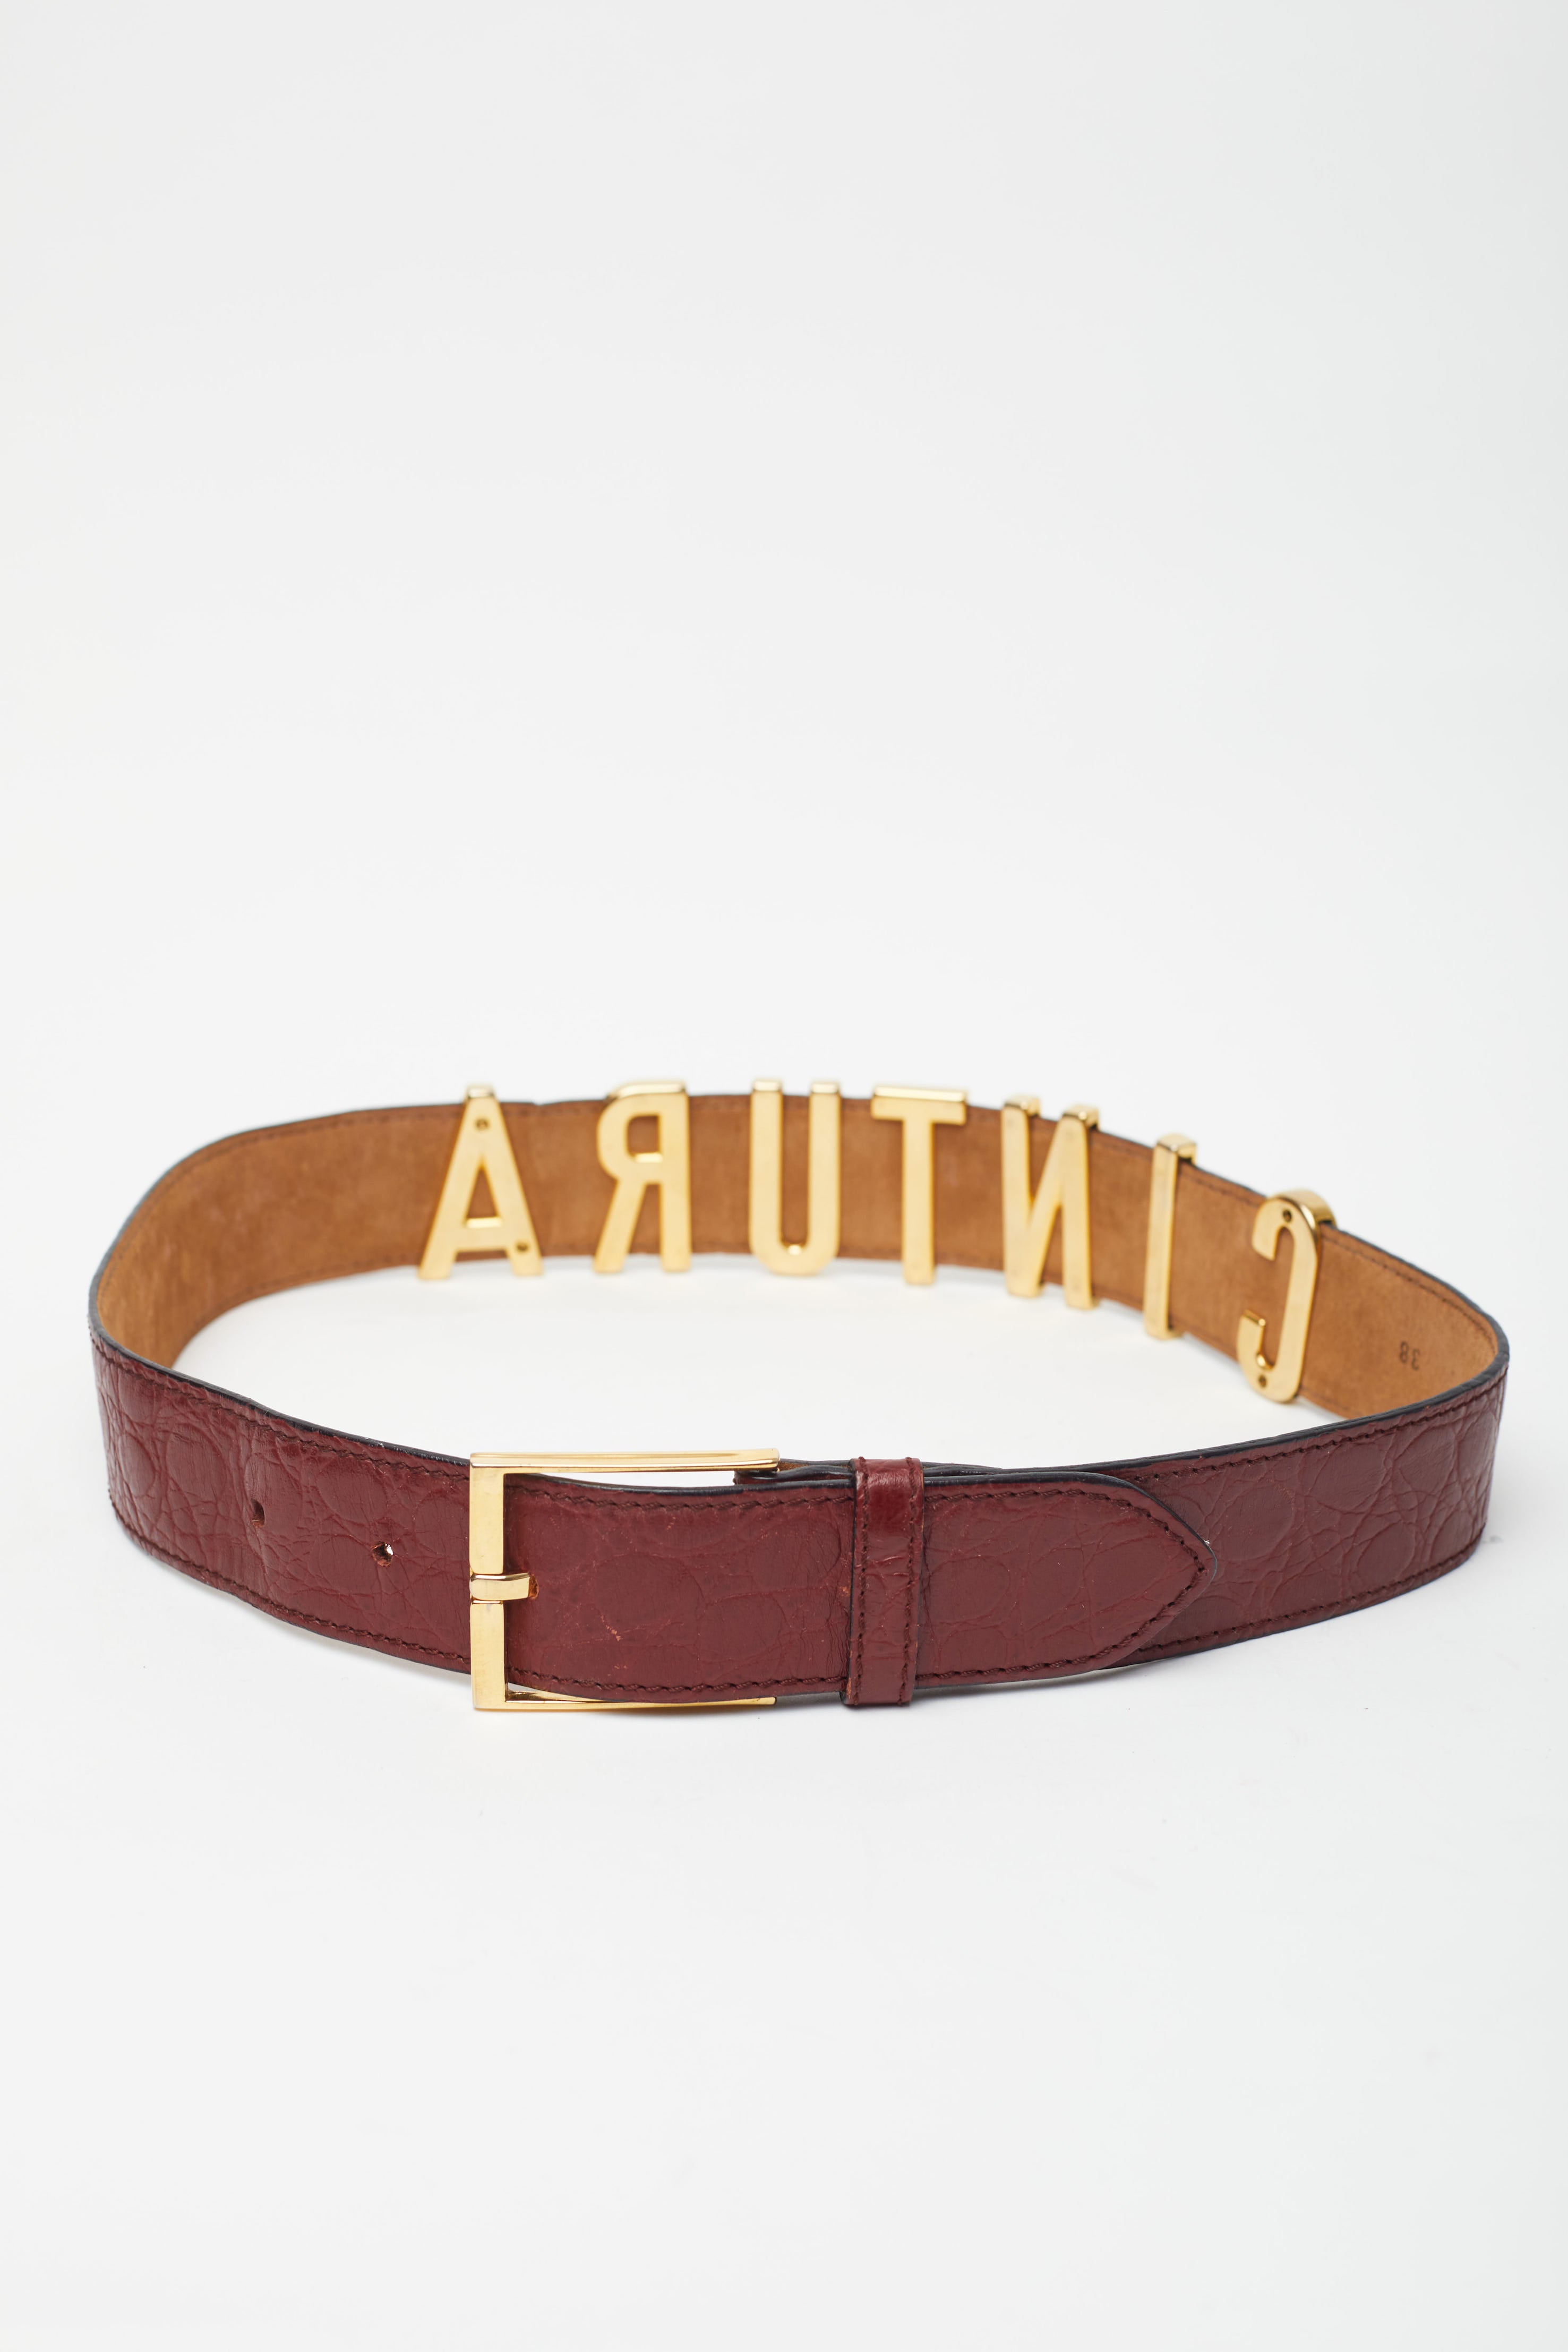 Moschino <br> 90's Moschino by Redwall 'Cintura' letter croc effect leather belt